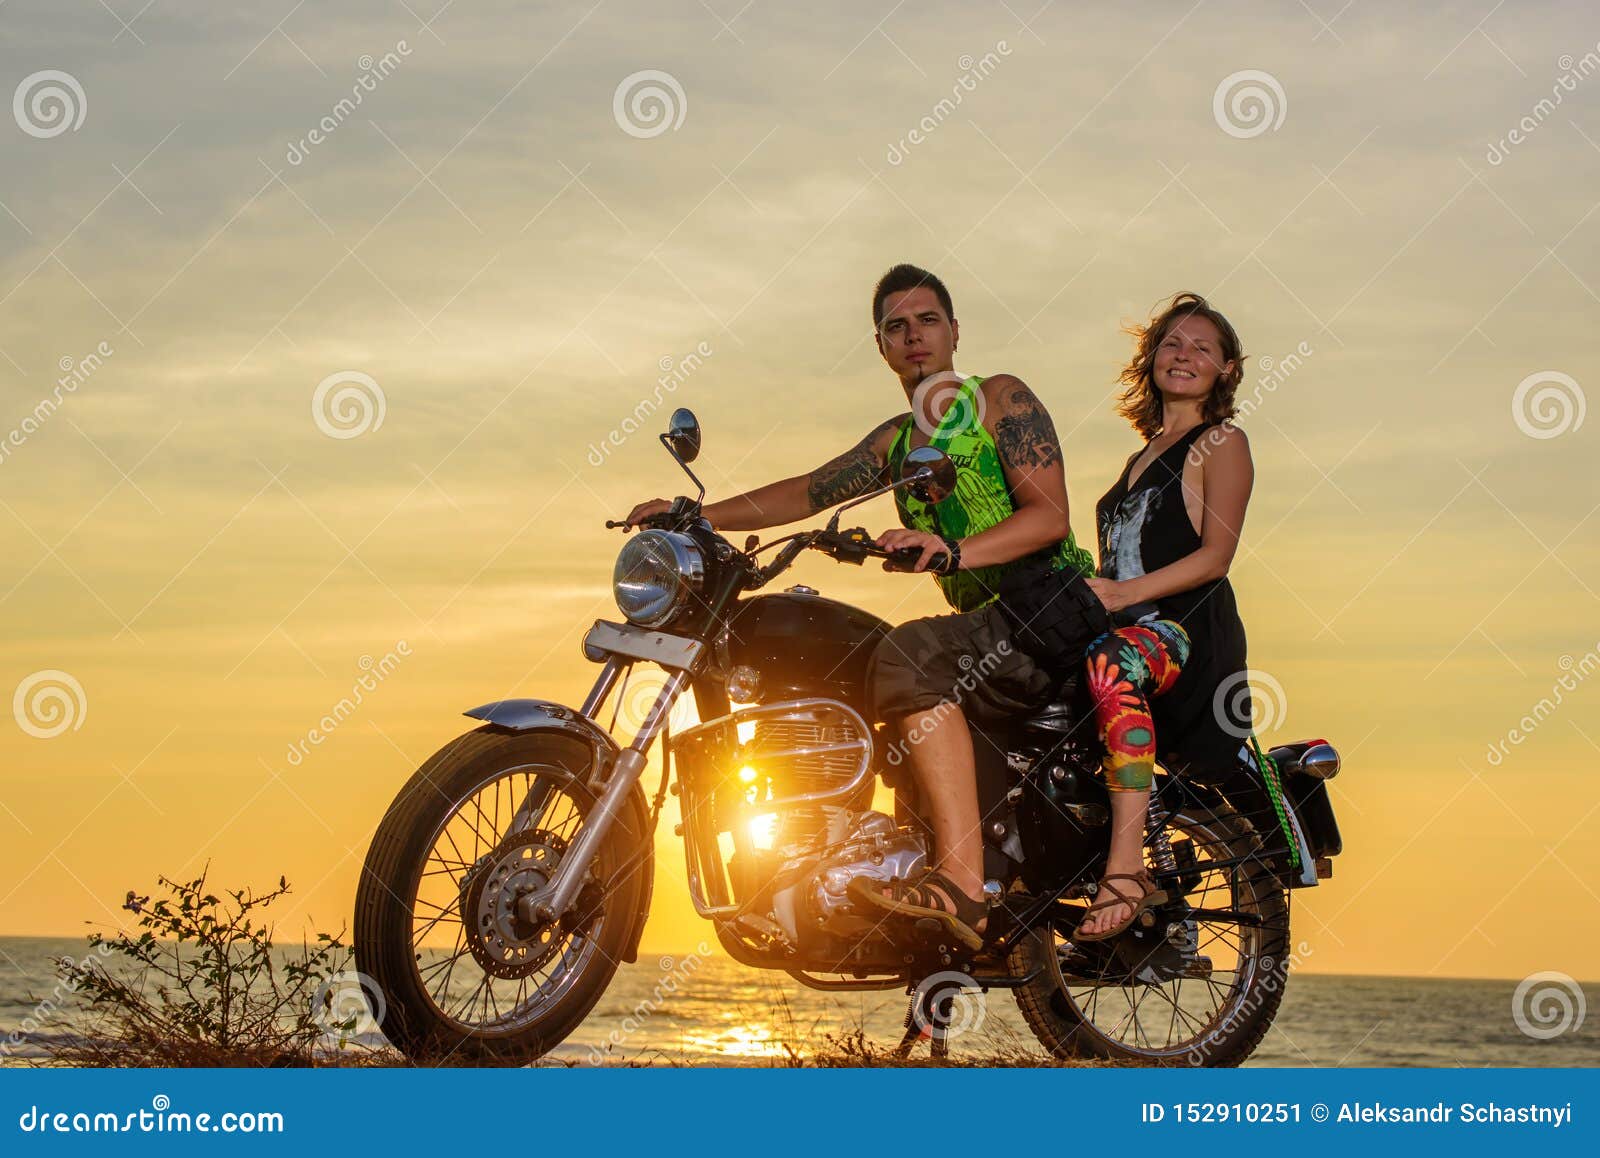 Indian Couple Bike Stock Photos and Images - 123RF